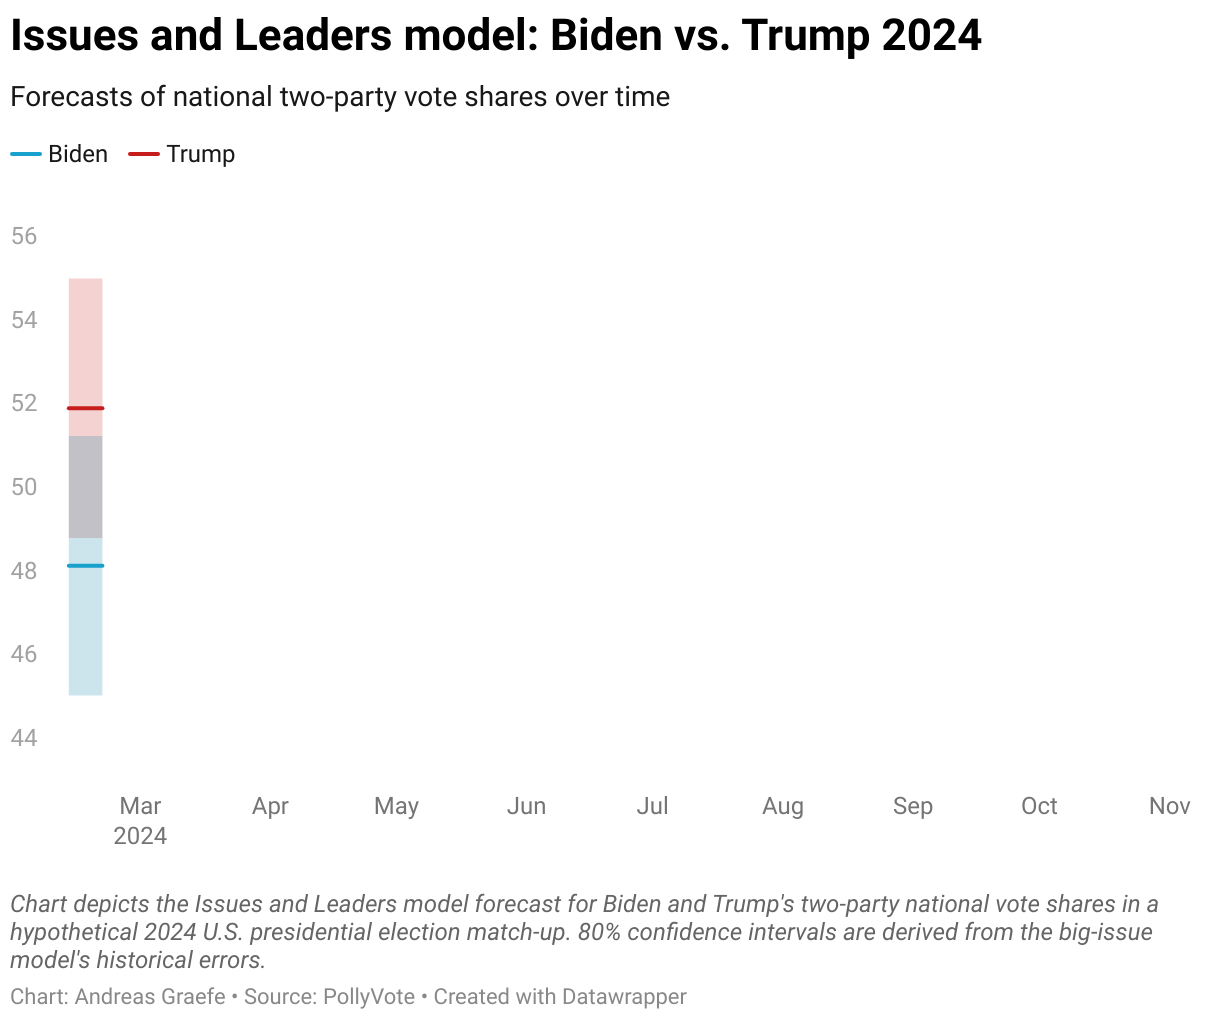 Chart depicts the Issues and Leaders model forecast for Biden and Trump's two-party national vote shares.